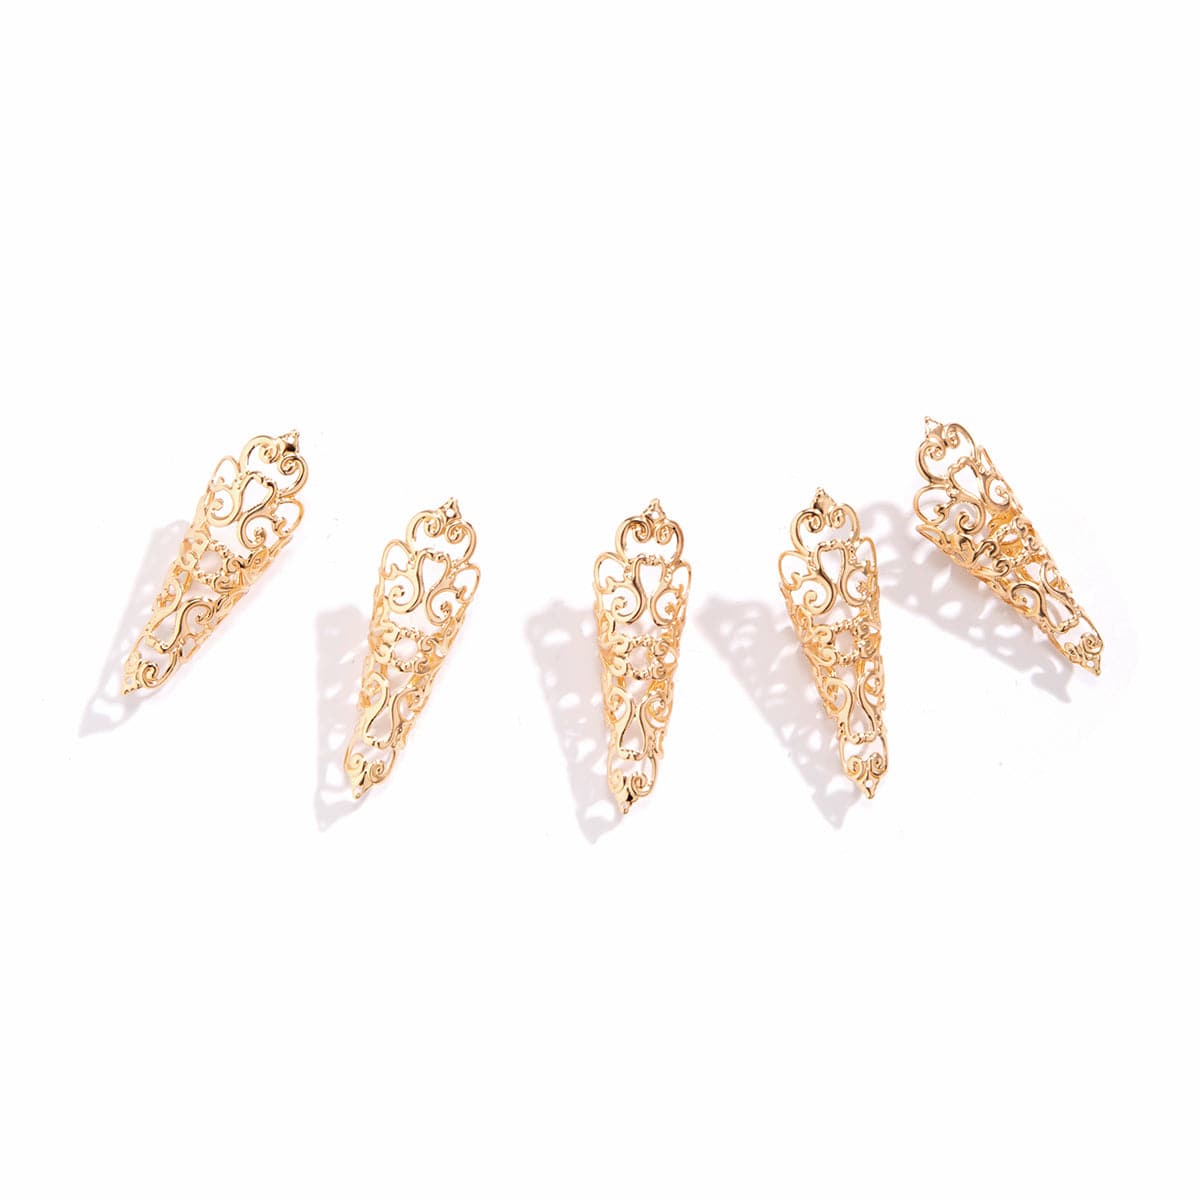 Gothic Gold Silver Plated Five Fingers Nails Ring Set - ArtGalleryZen